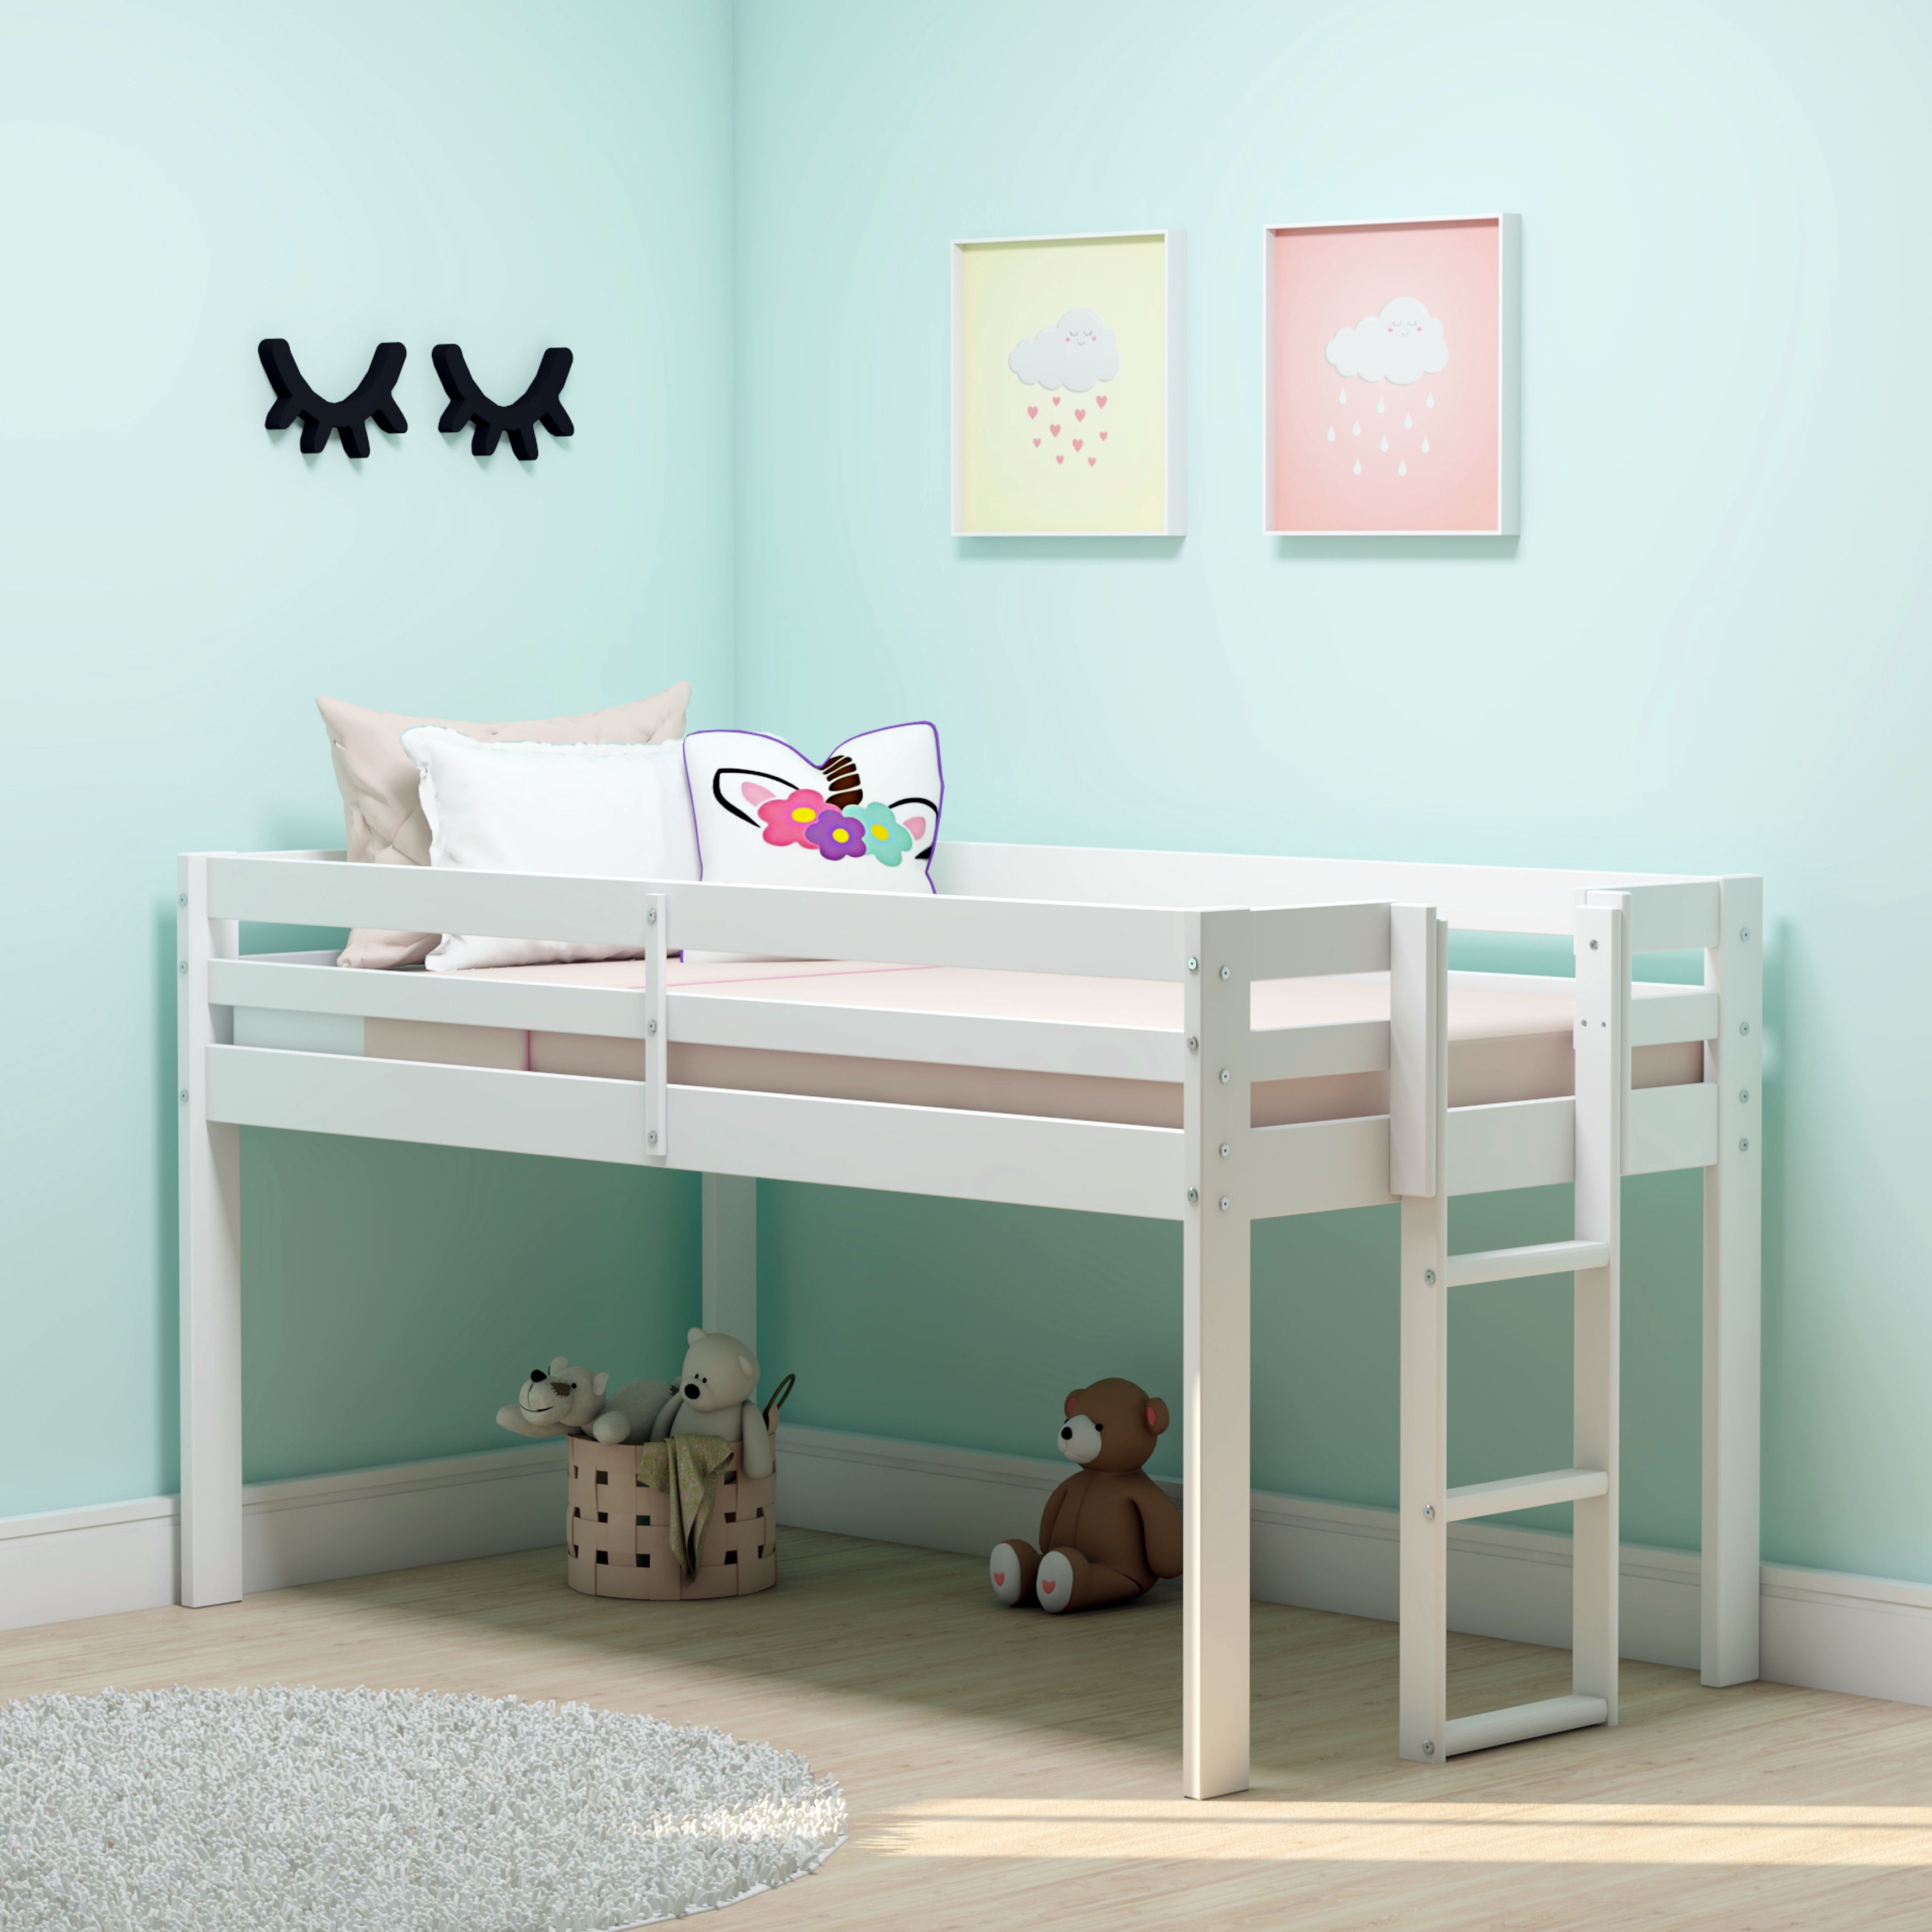 junior beds for sale